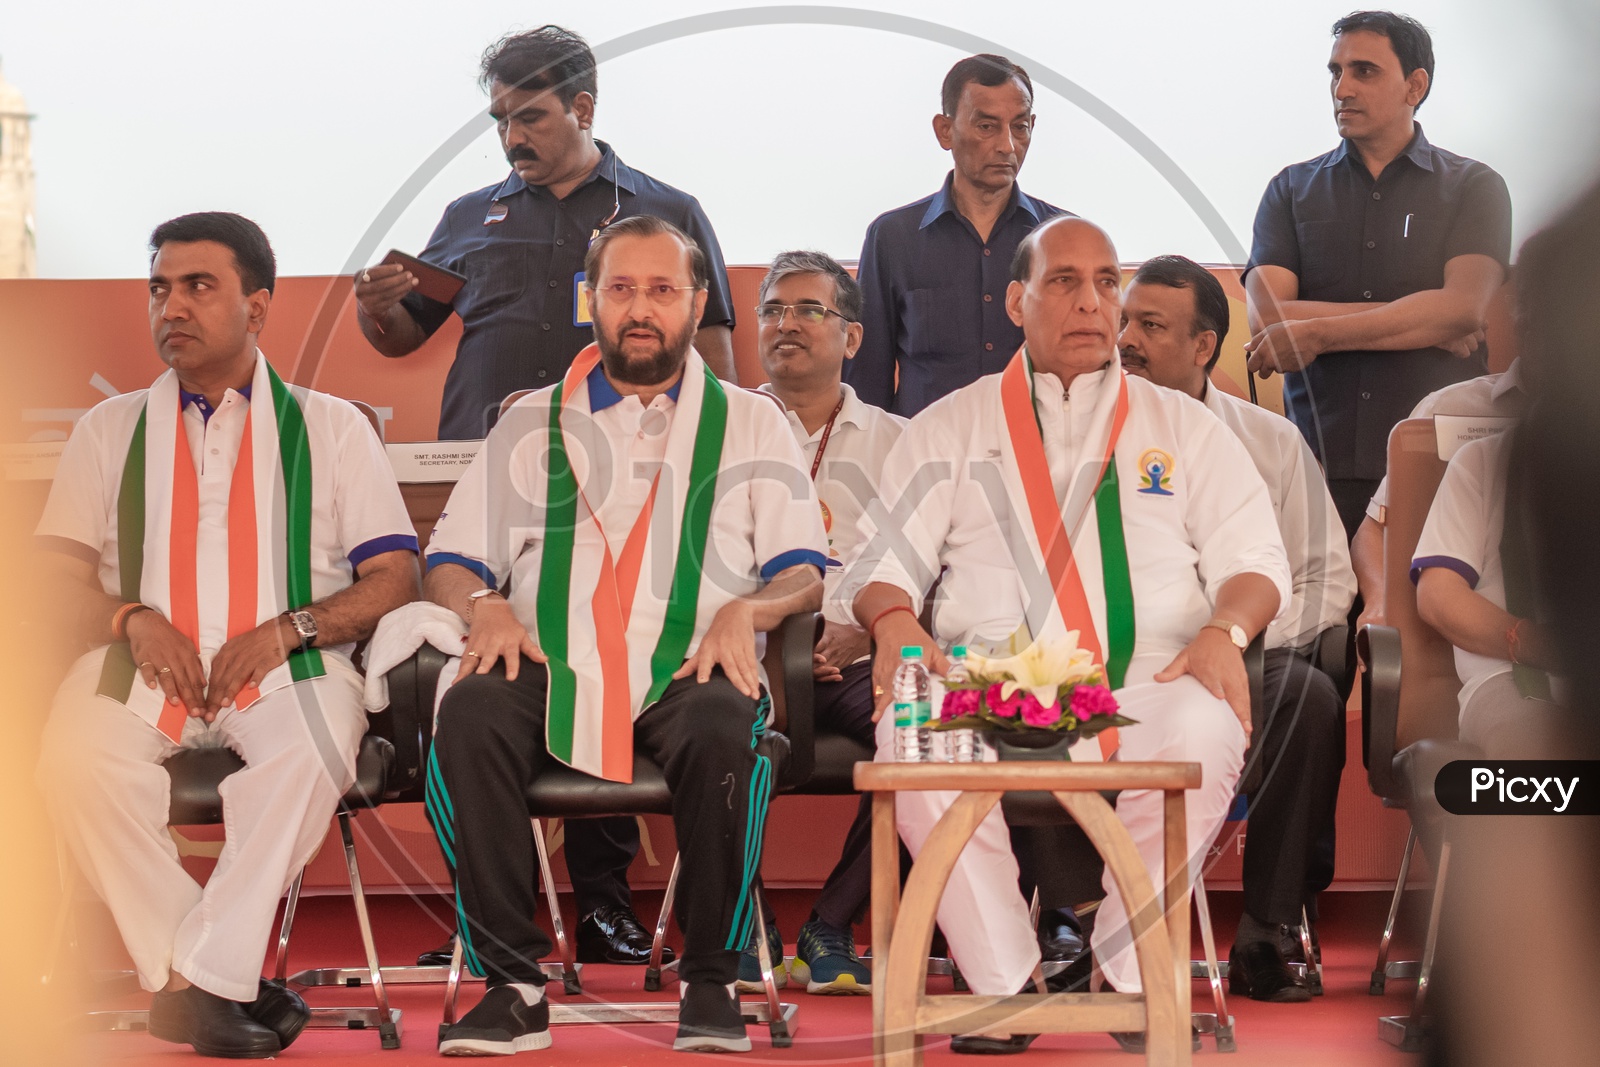 Pramod Sawant(Chief Minister of Goa), Prakash Javadekar(Minister of Environment, Forest and Climate Change), Rajnath Singh(Defence Minister of India) From the left